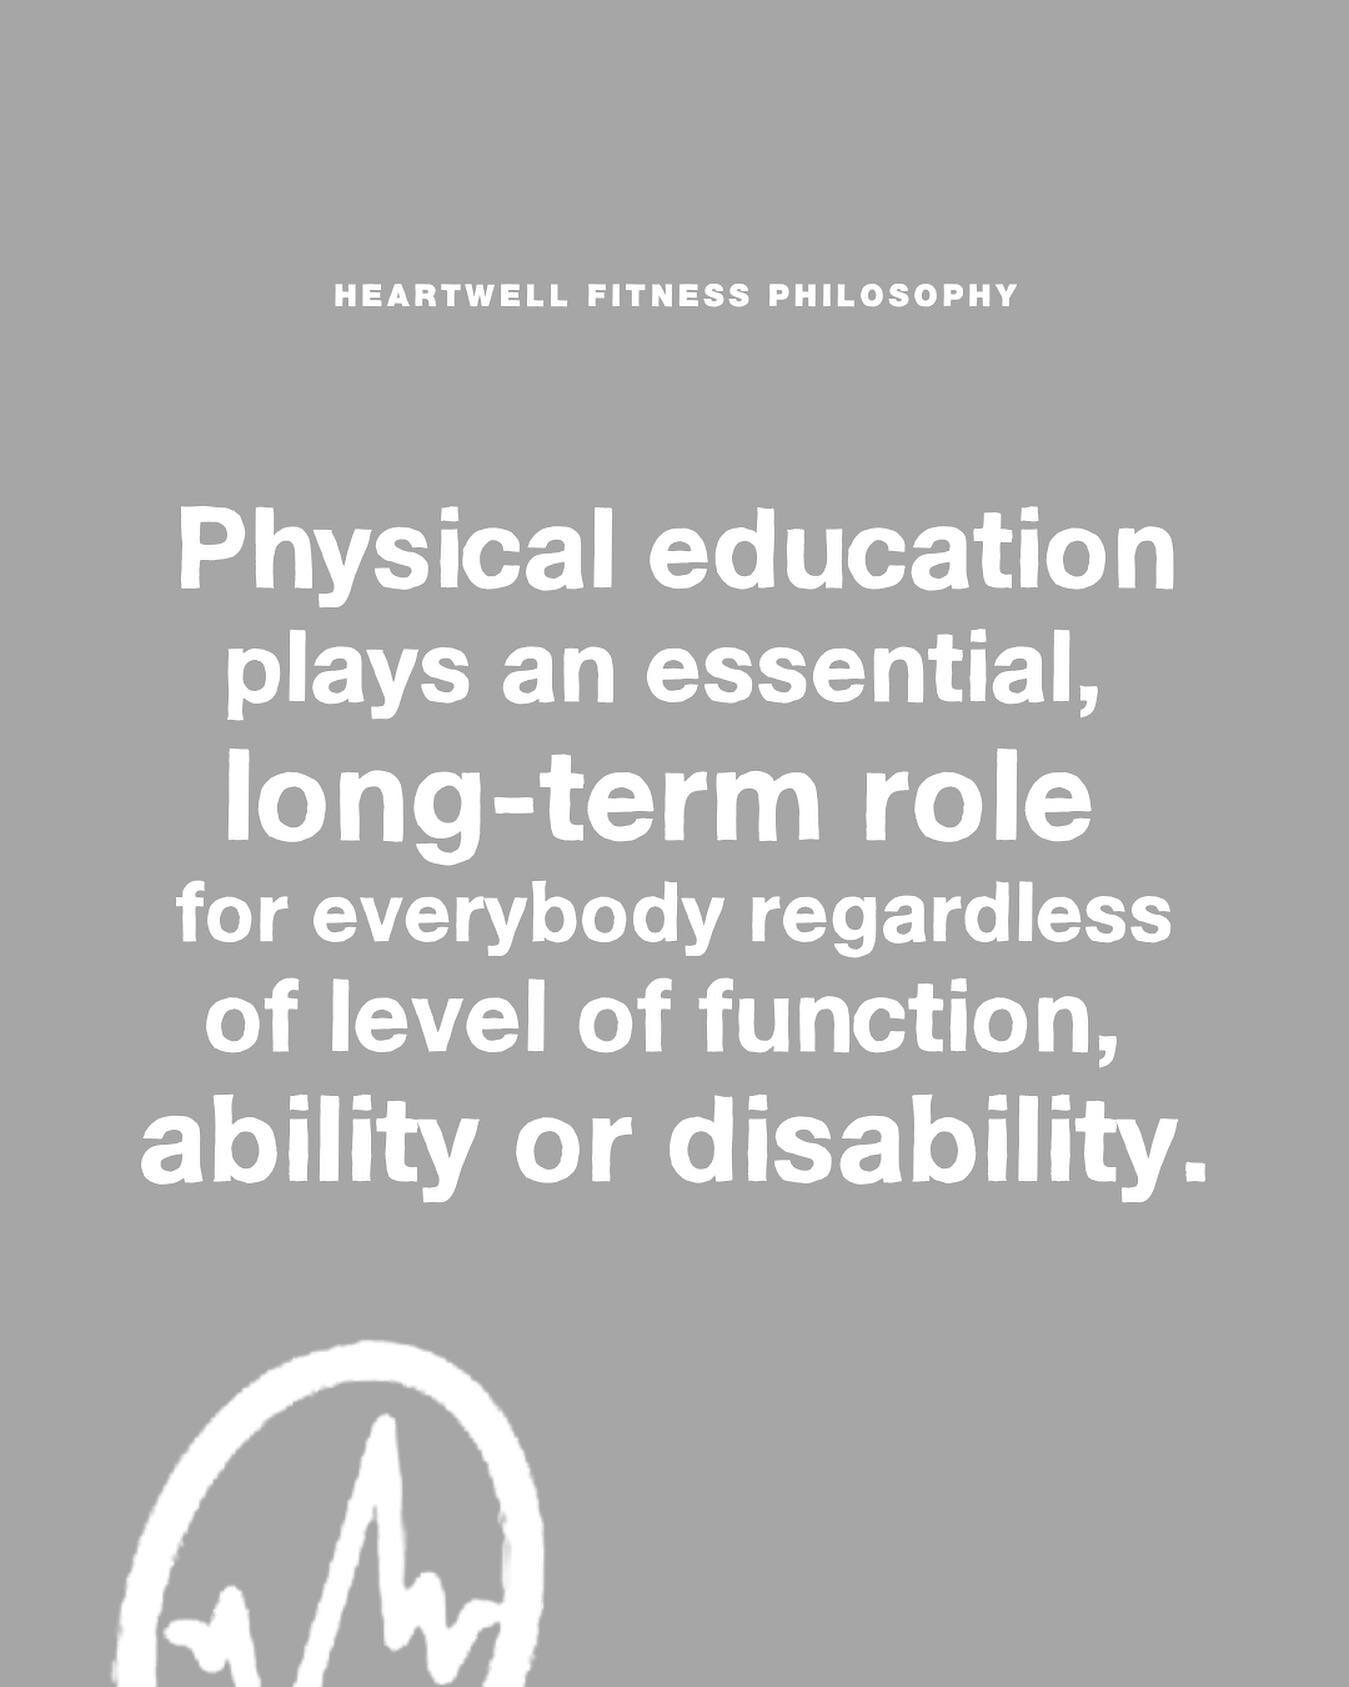 We believe in the power of physical education.

〰️

Image description:
&ldquo;Heartwell Fitness Philosophy: Physical education plays an essential, long-term role for everybody regardless of level of function, ability or disability.&rdquo;

#ndis #dis